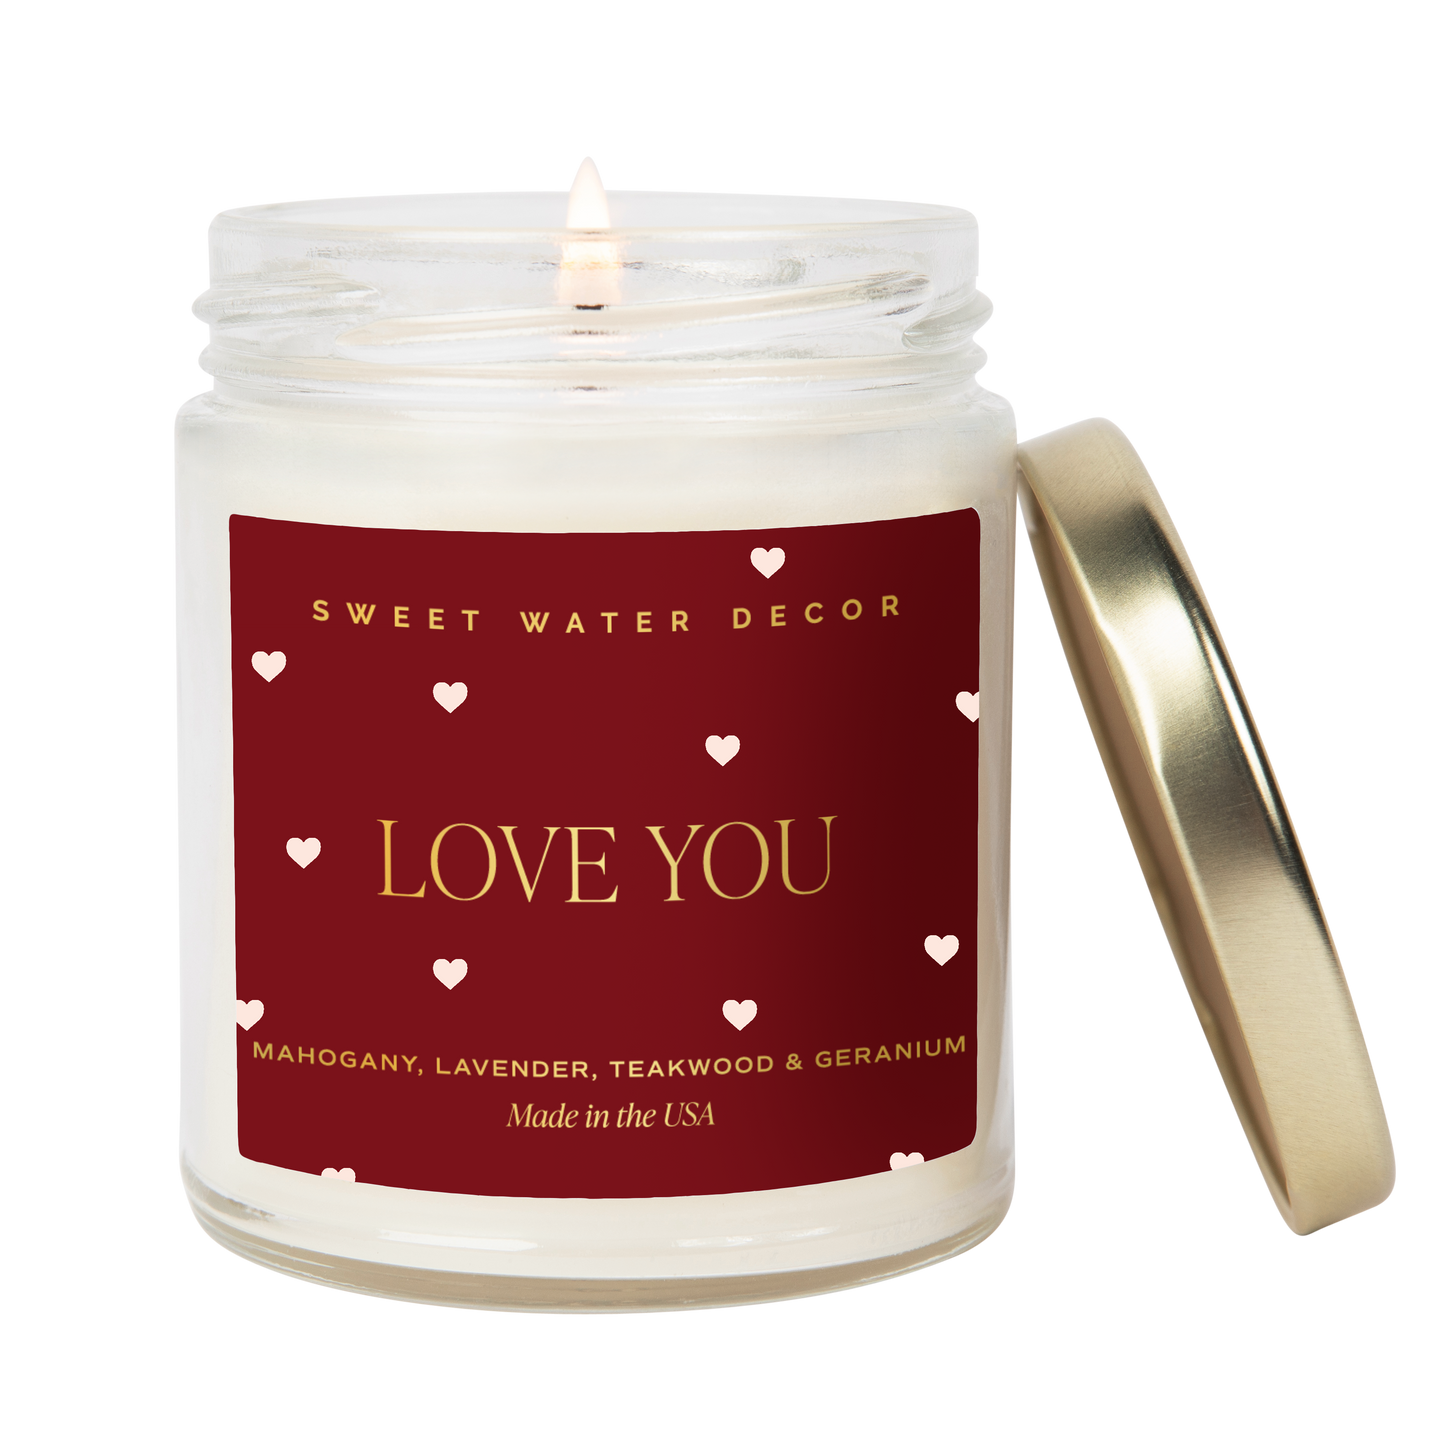 *NEW* Love You Soy Candle- Valentine's Day Gift & Home Decor